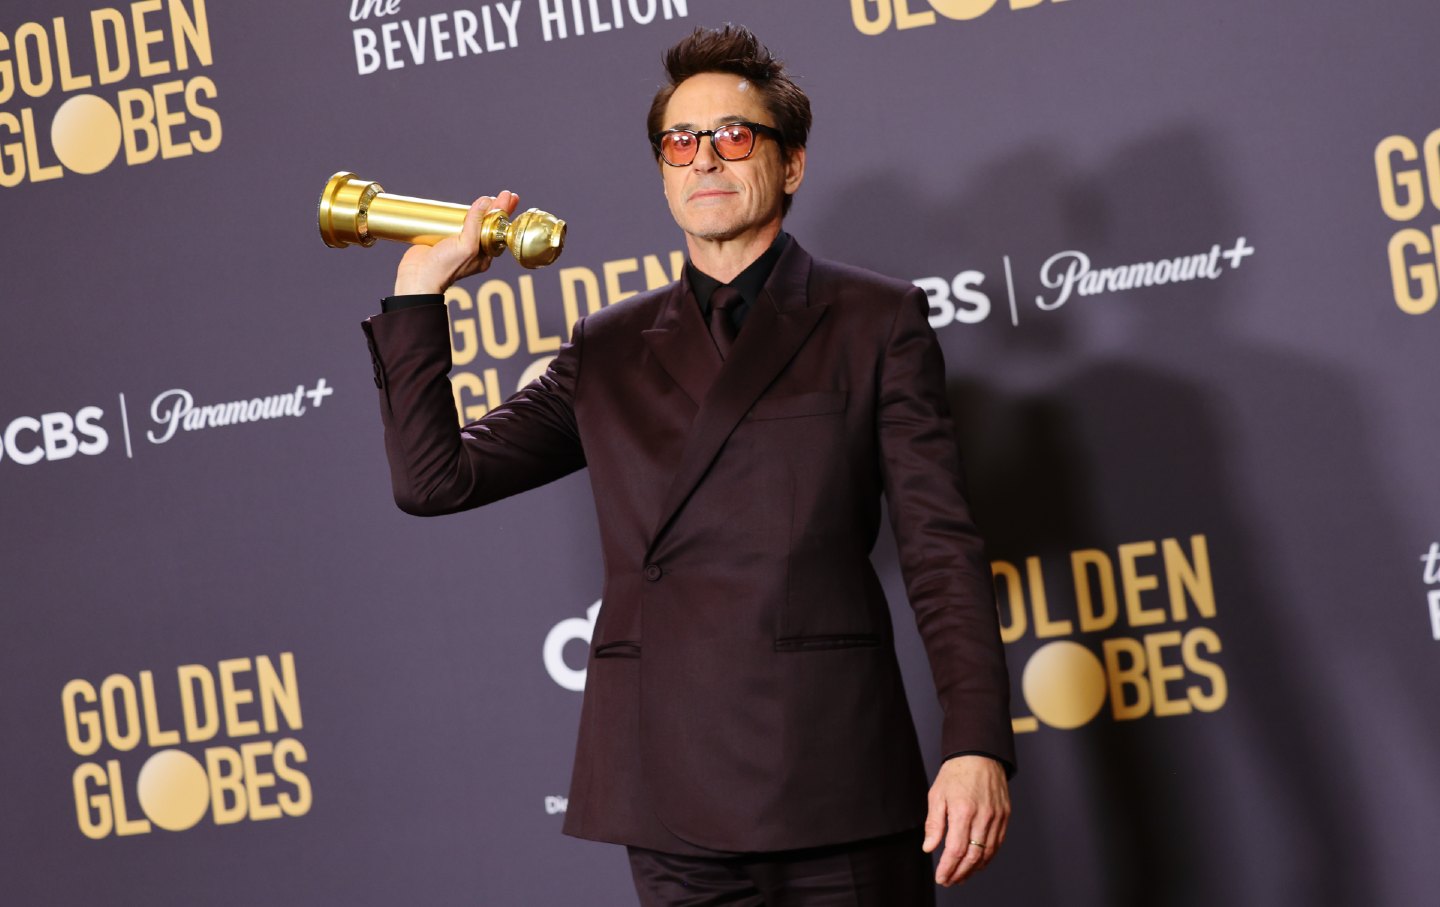 Robert Downey Jr. poses with his Golden Globe for Best Performance by a Male Actor in a Supporting Role